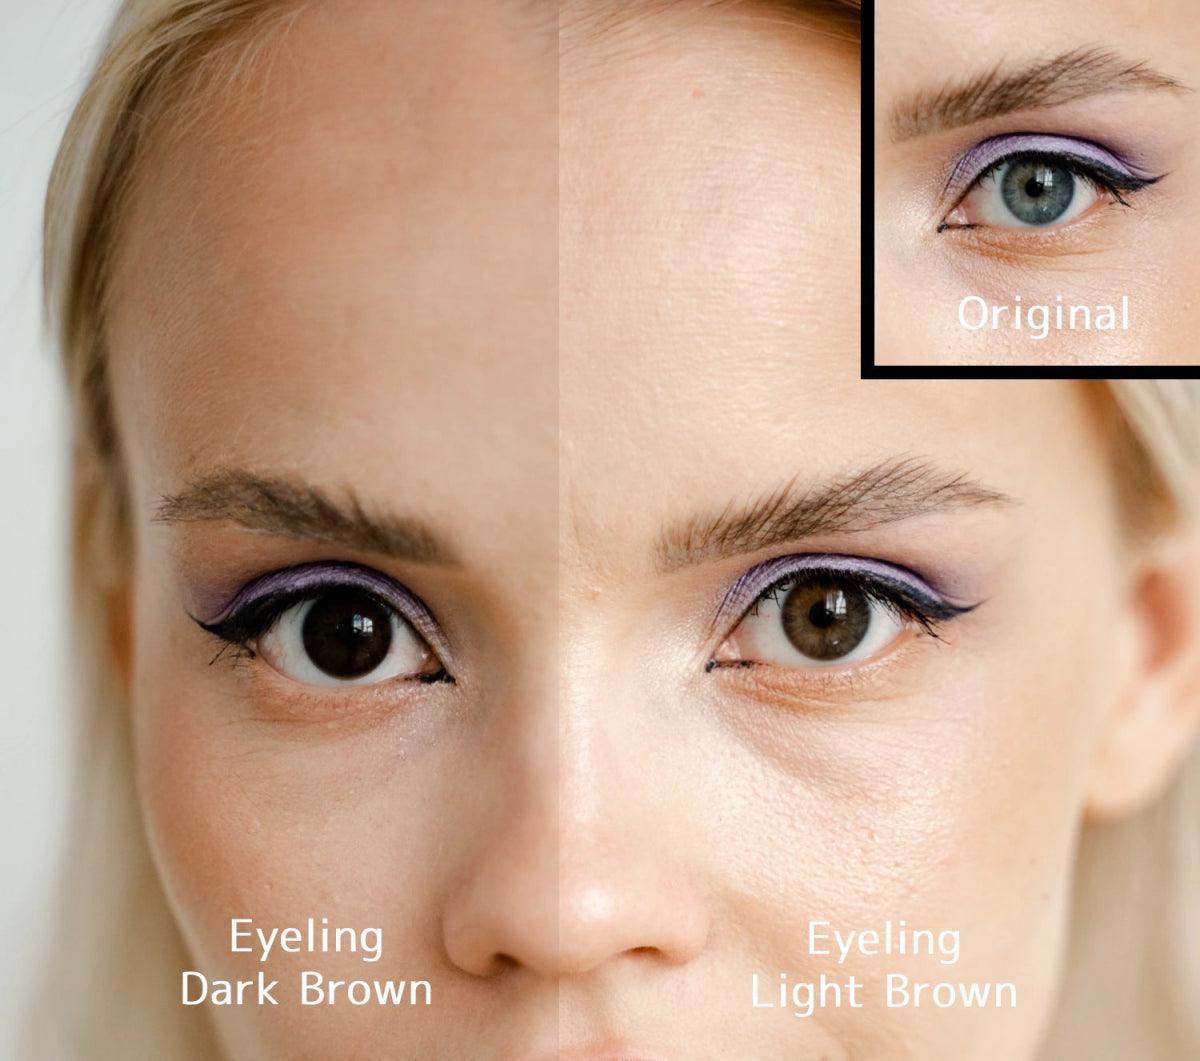 Eyeling Dark Brown compared to Eyeling Light Brown colored contacts